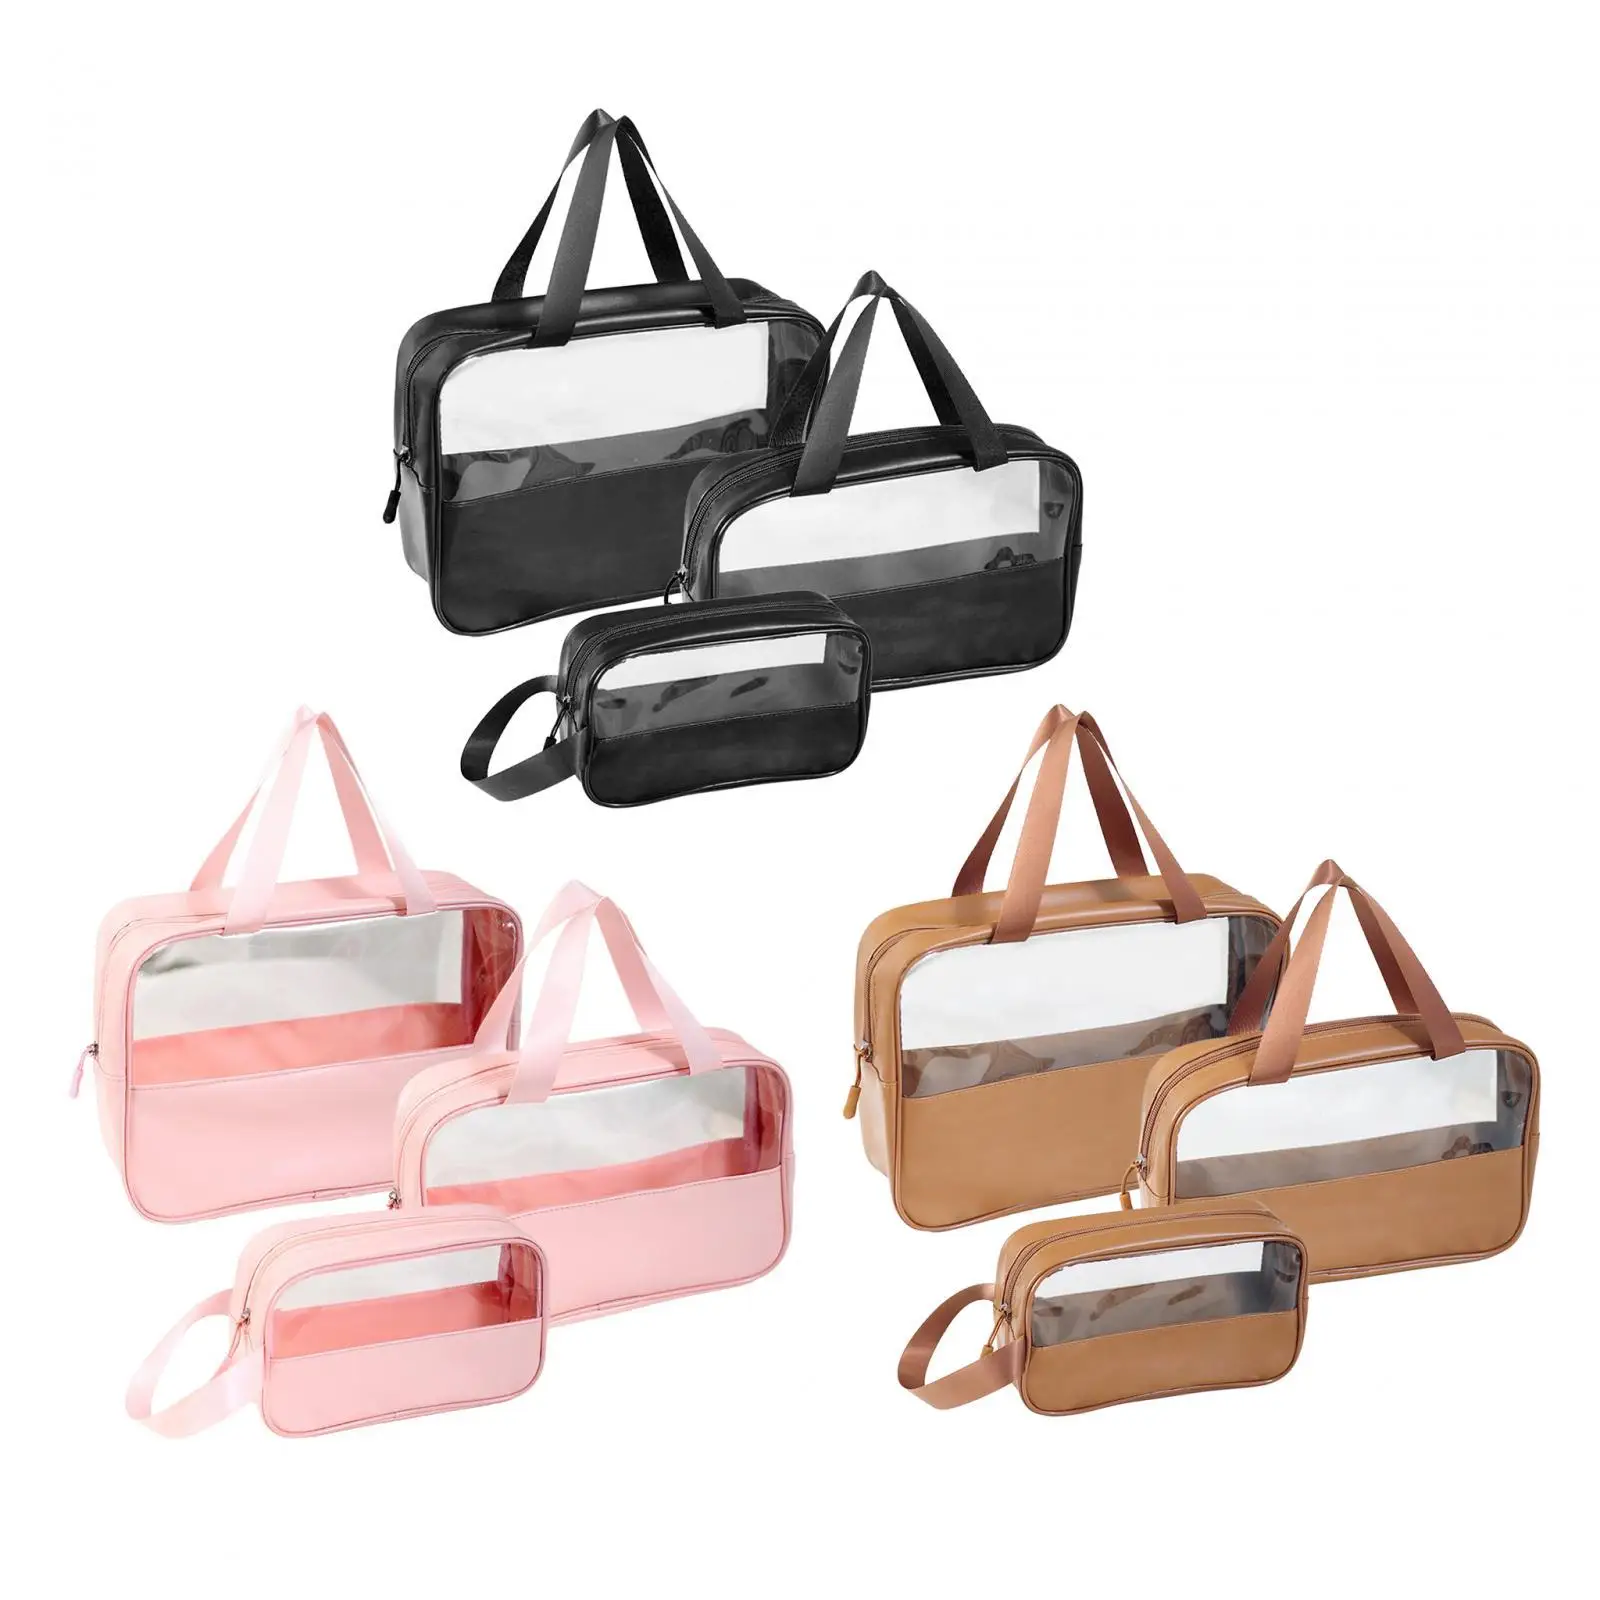 3Pcs Clear Makeup Bag Women Cosmetic Bag Organizer Portable Storage Bag with Zipper Clear Travel Bag Multifunction Toiletry Bag